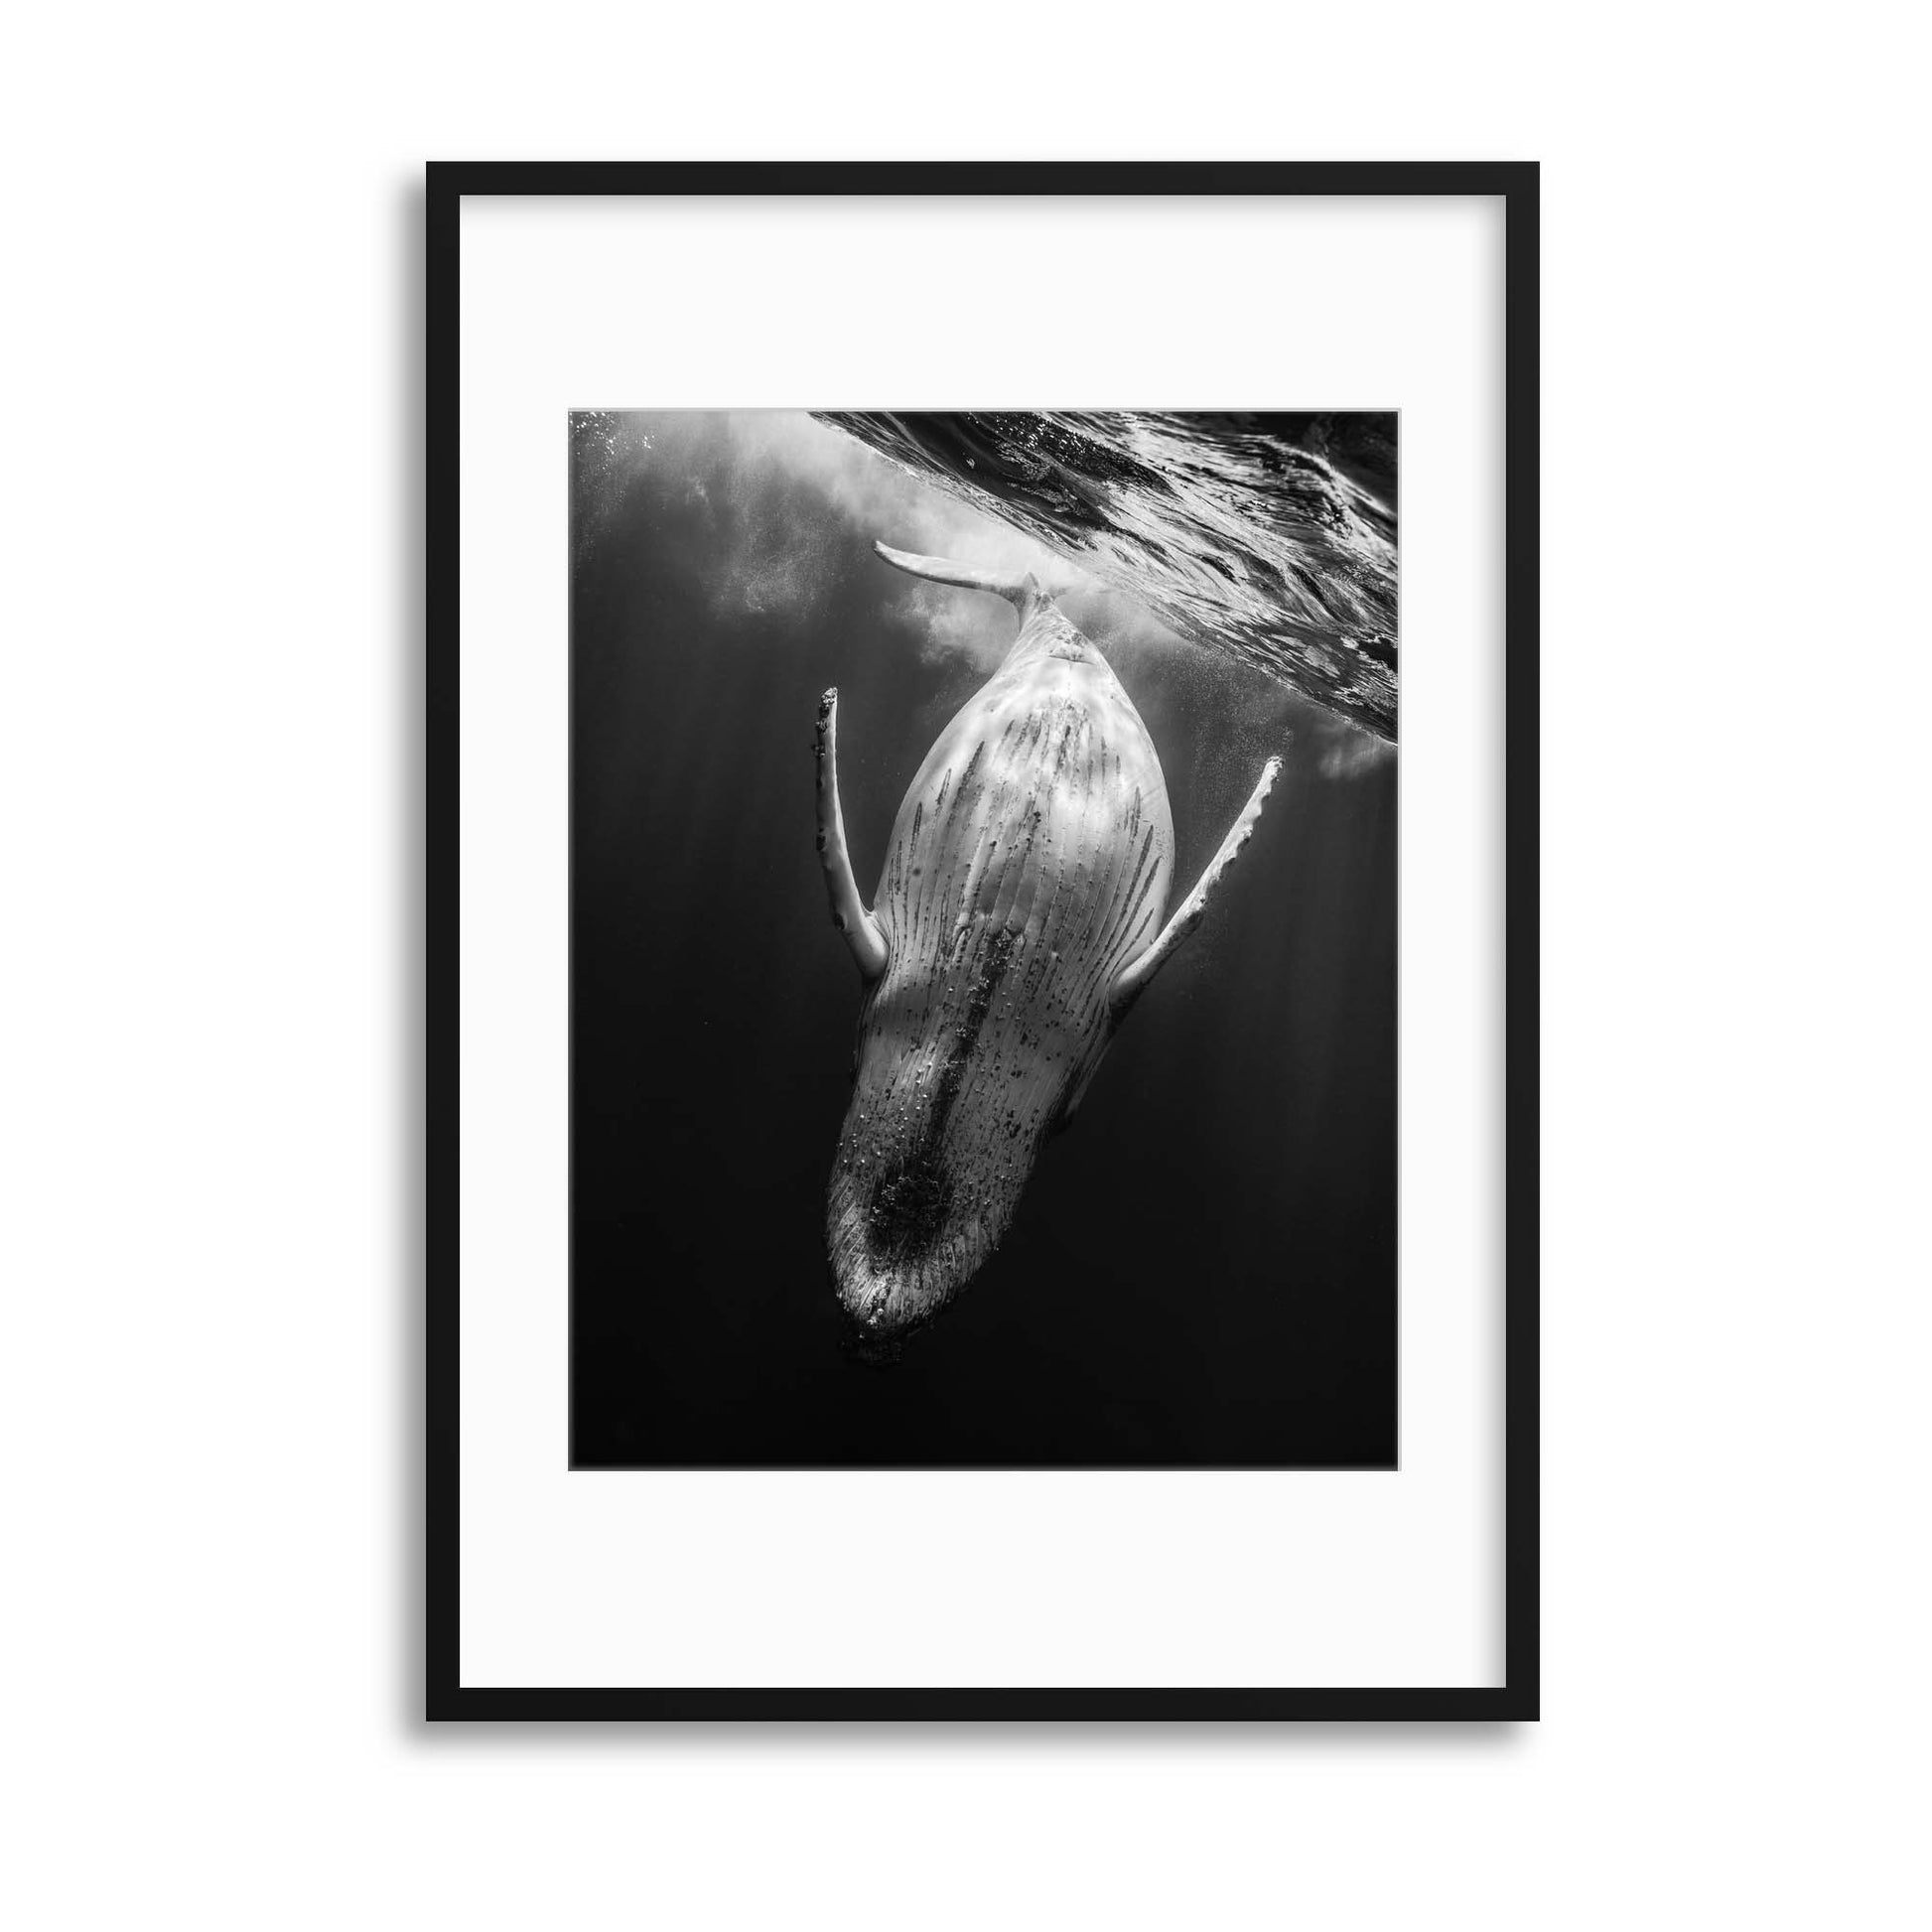 Black and Whale by Barathieu Gabriel Framed Print - USTAD HOME